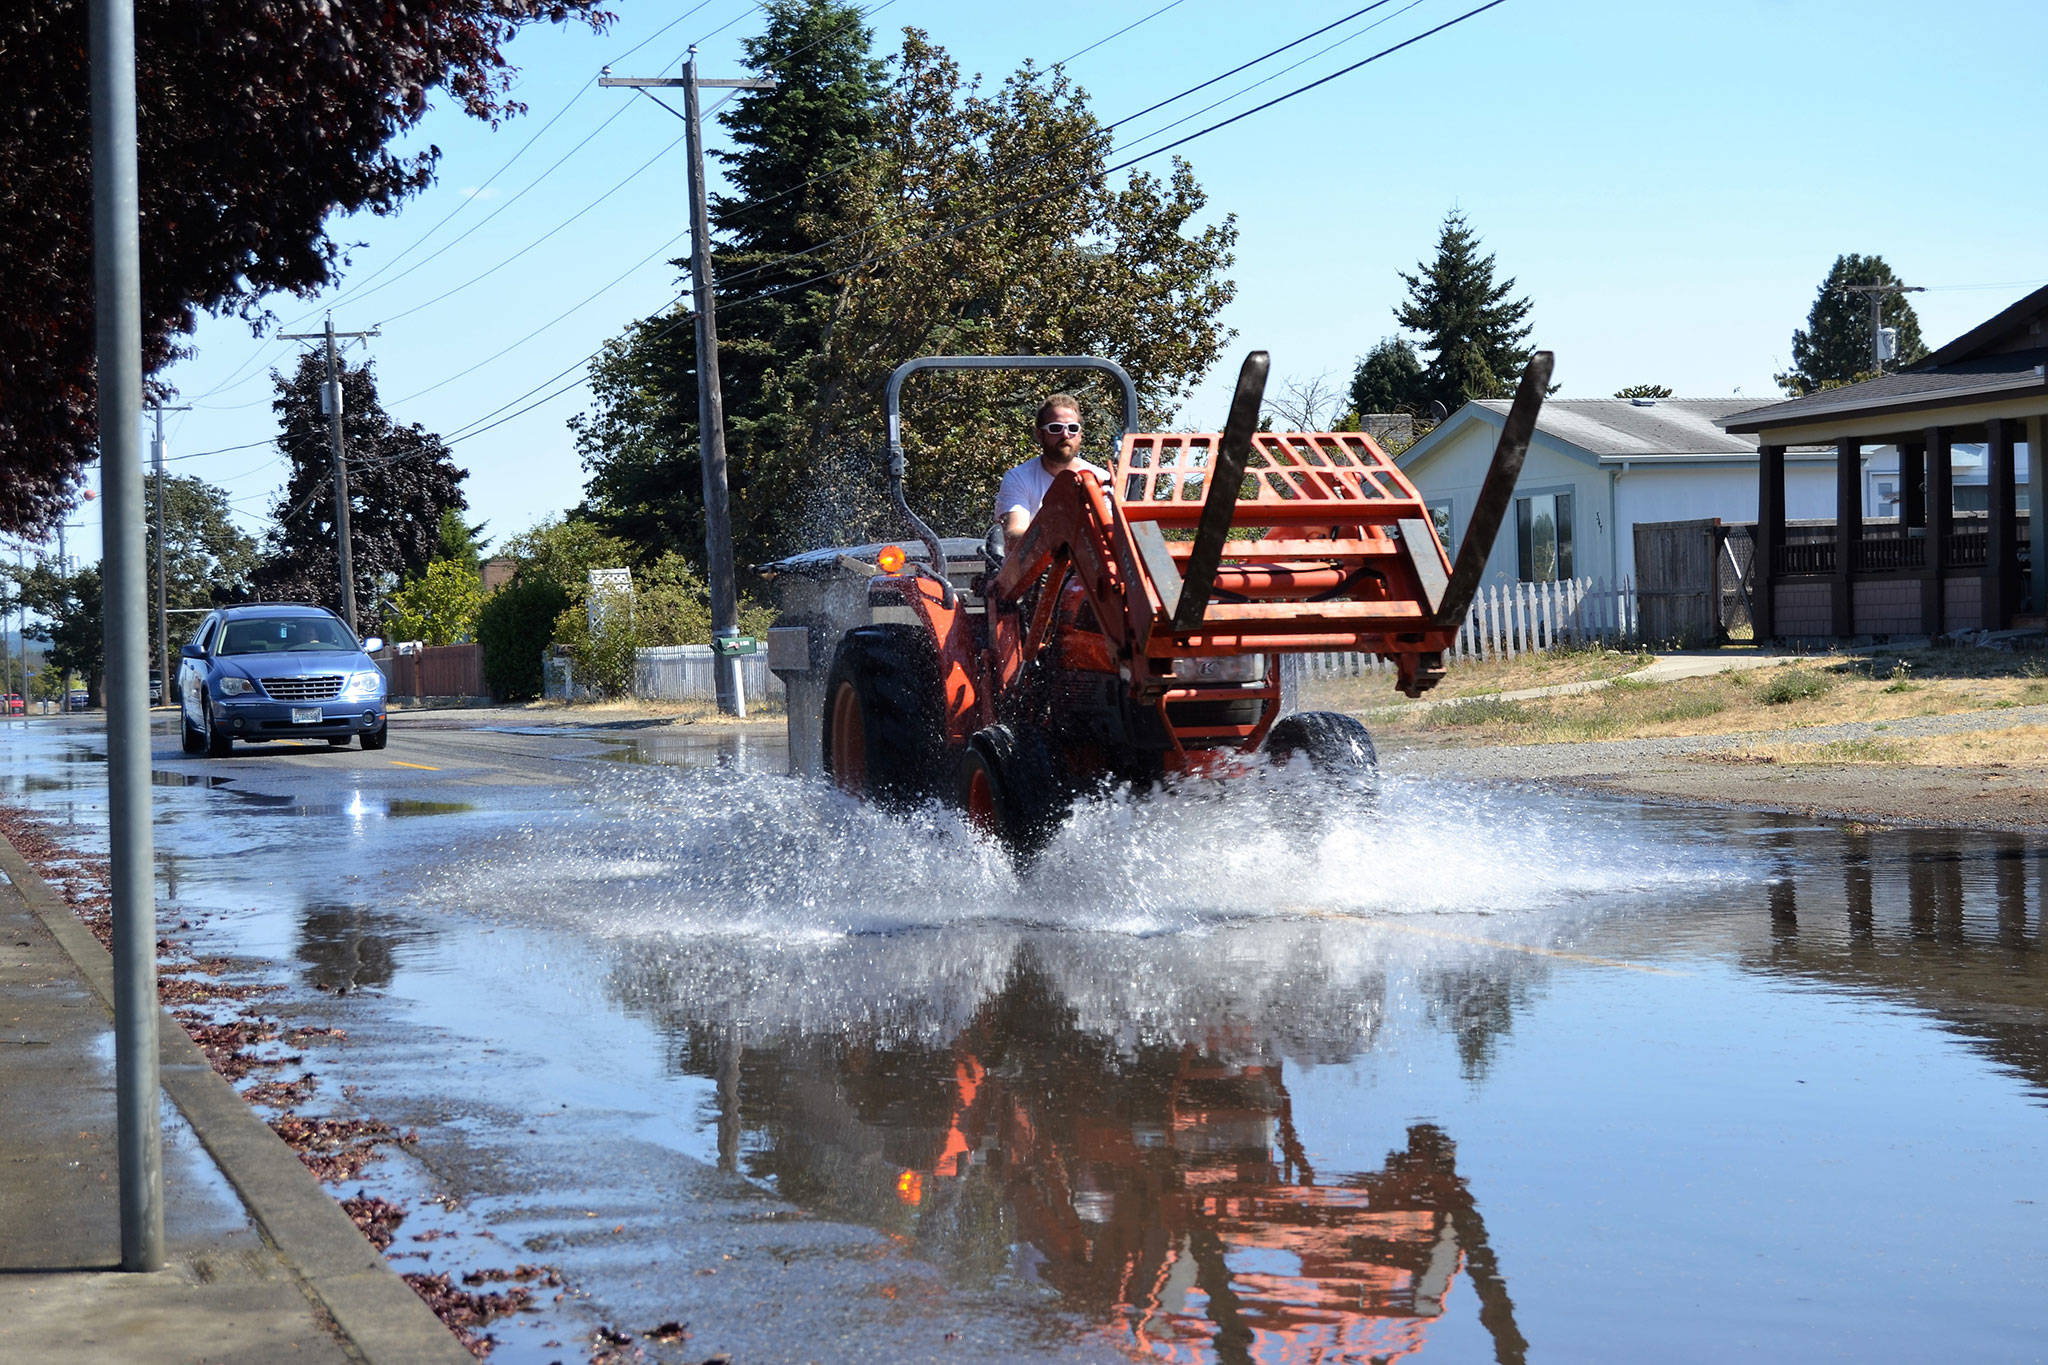 In 2018, staff with the City of Sequim anticipate construction beginning on rebuilding Fir Street from Sequim Avenue to Fifth Avenue. The road is bumpy and sometimes floods, seen here in late August when a Sequim School District employee drives through. Sequim Gazette photo by Matthew Nash